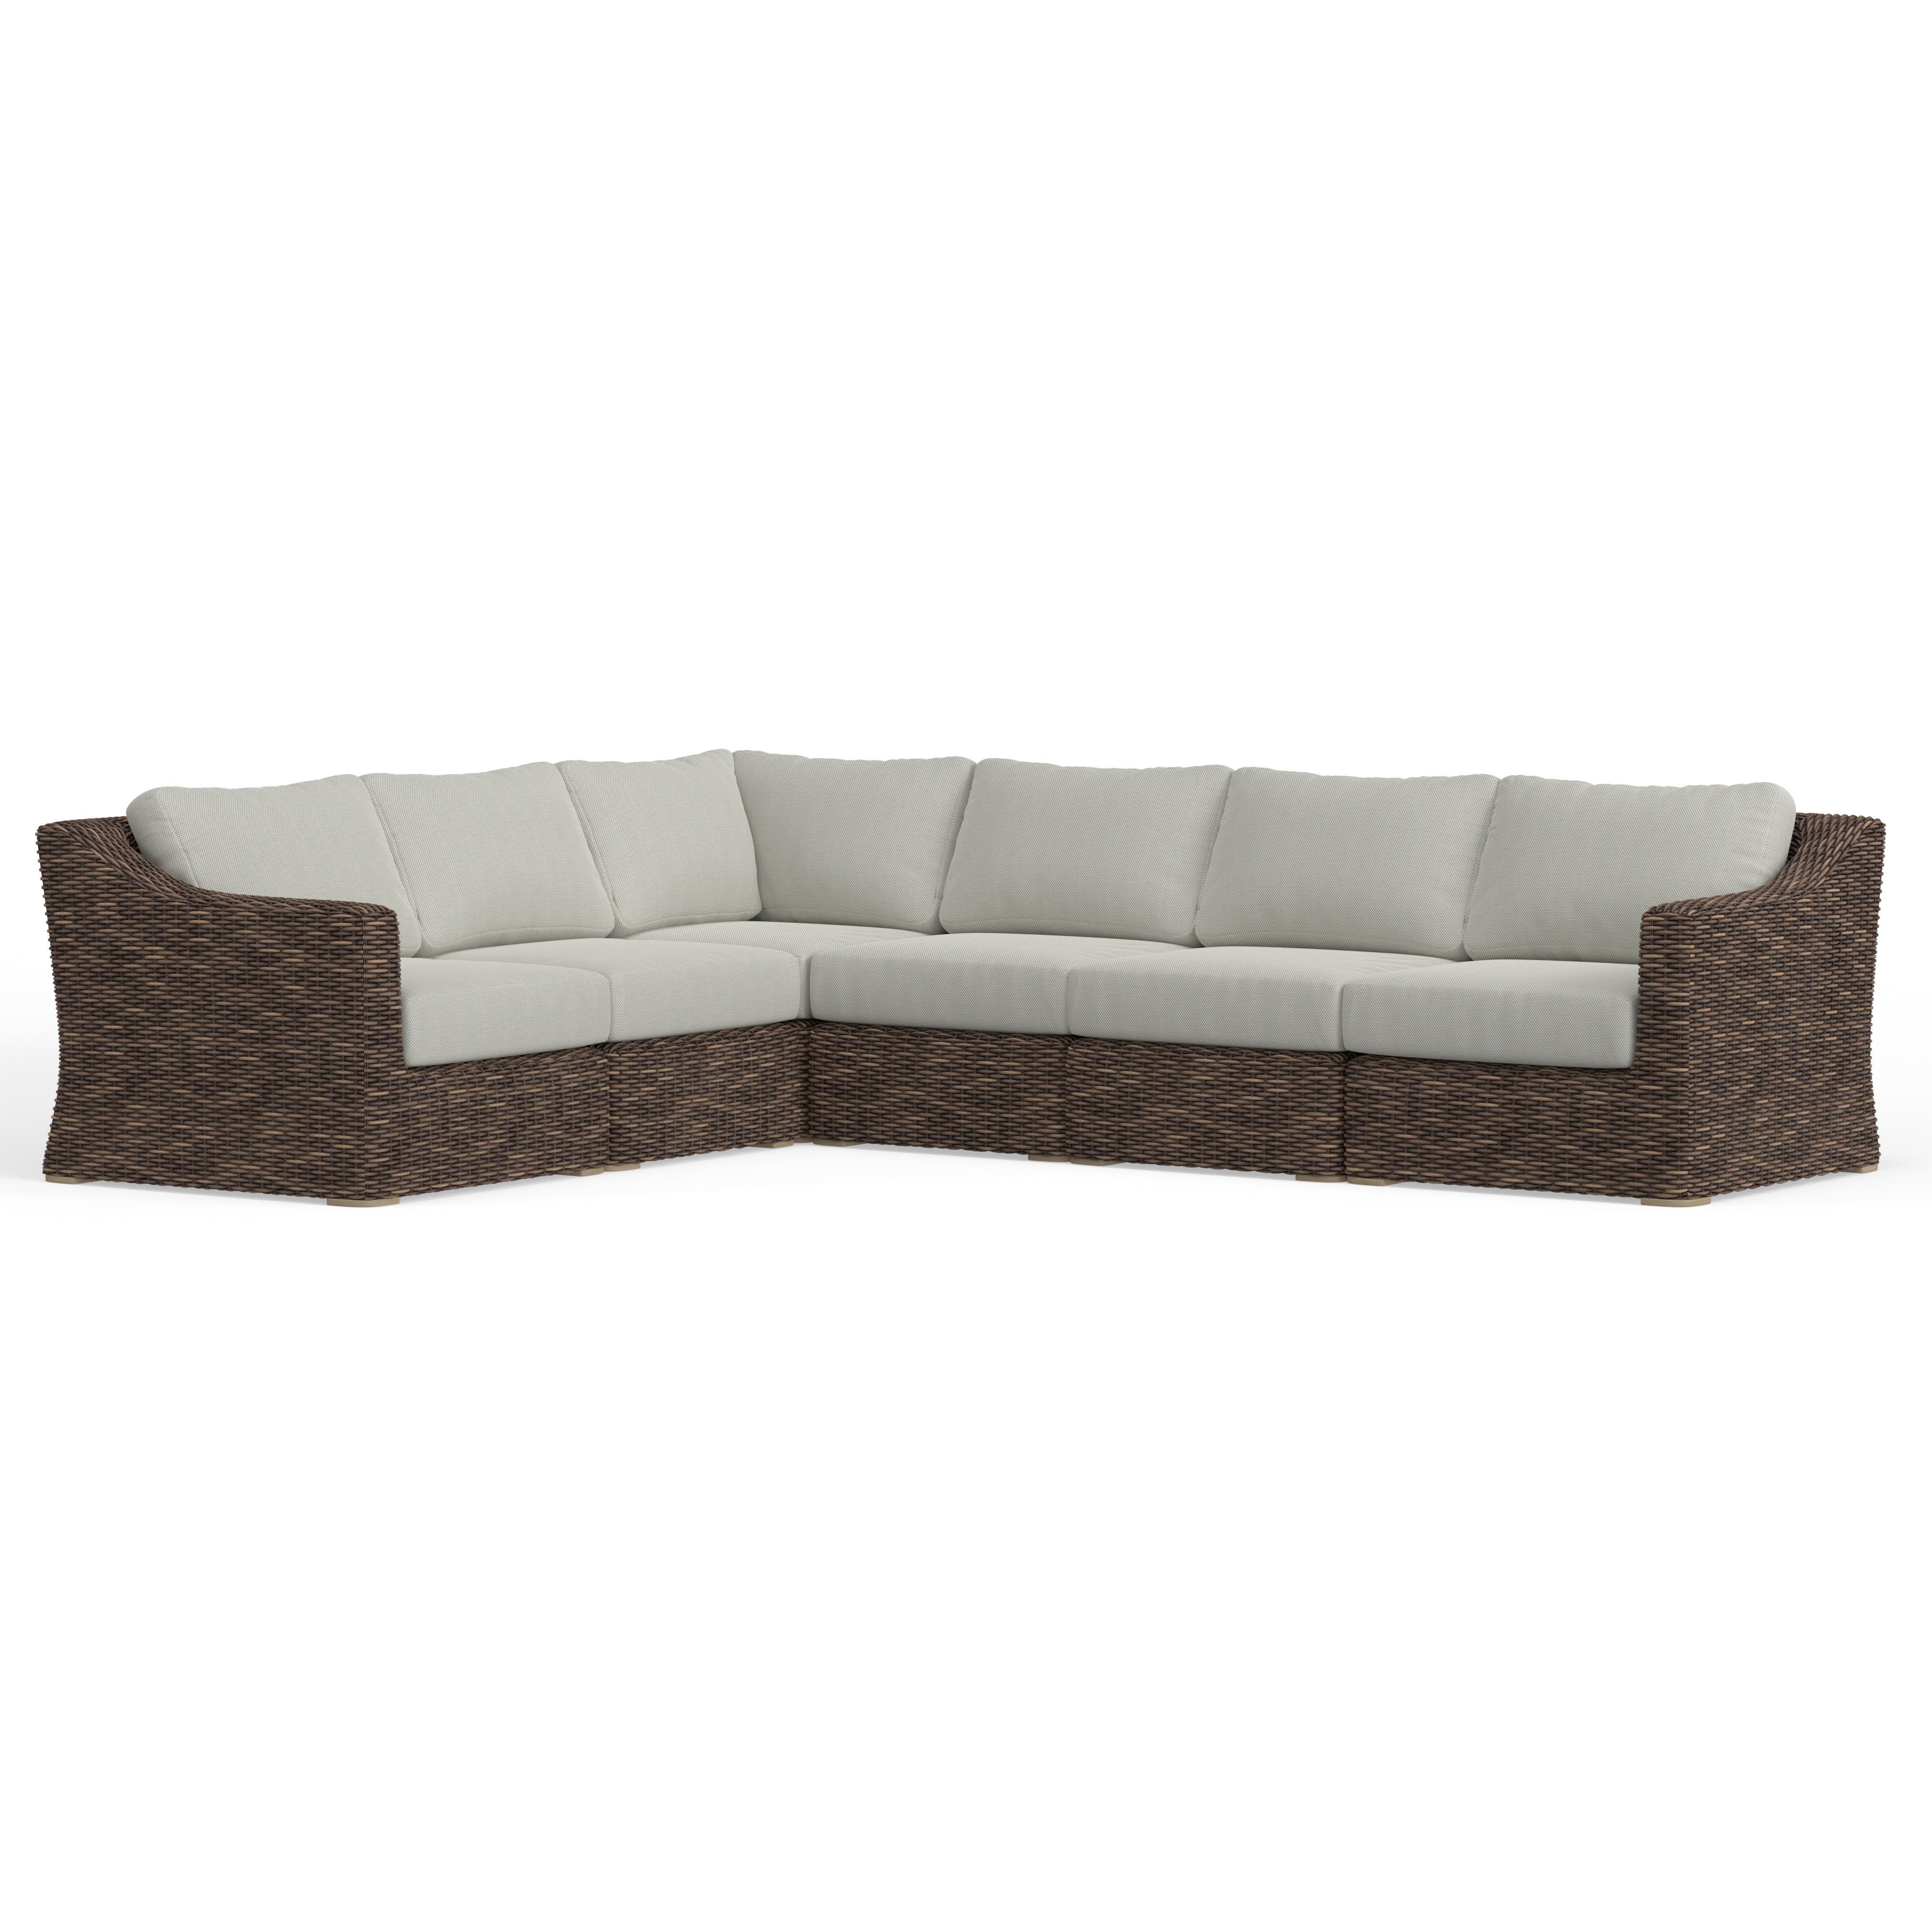 Most Comfortable 6 Seat Sectional